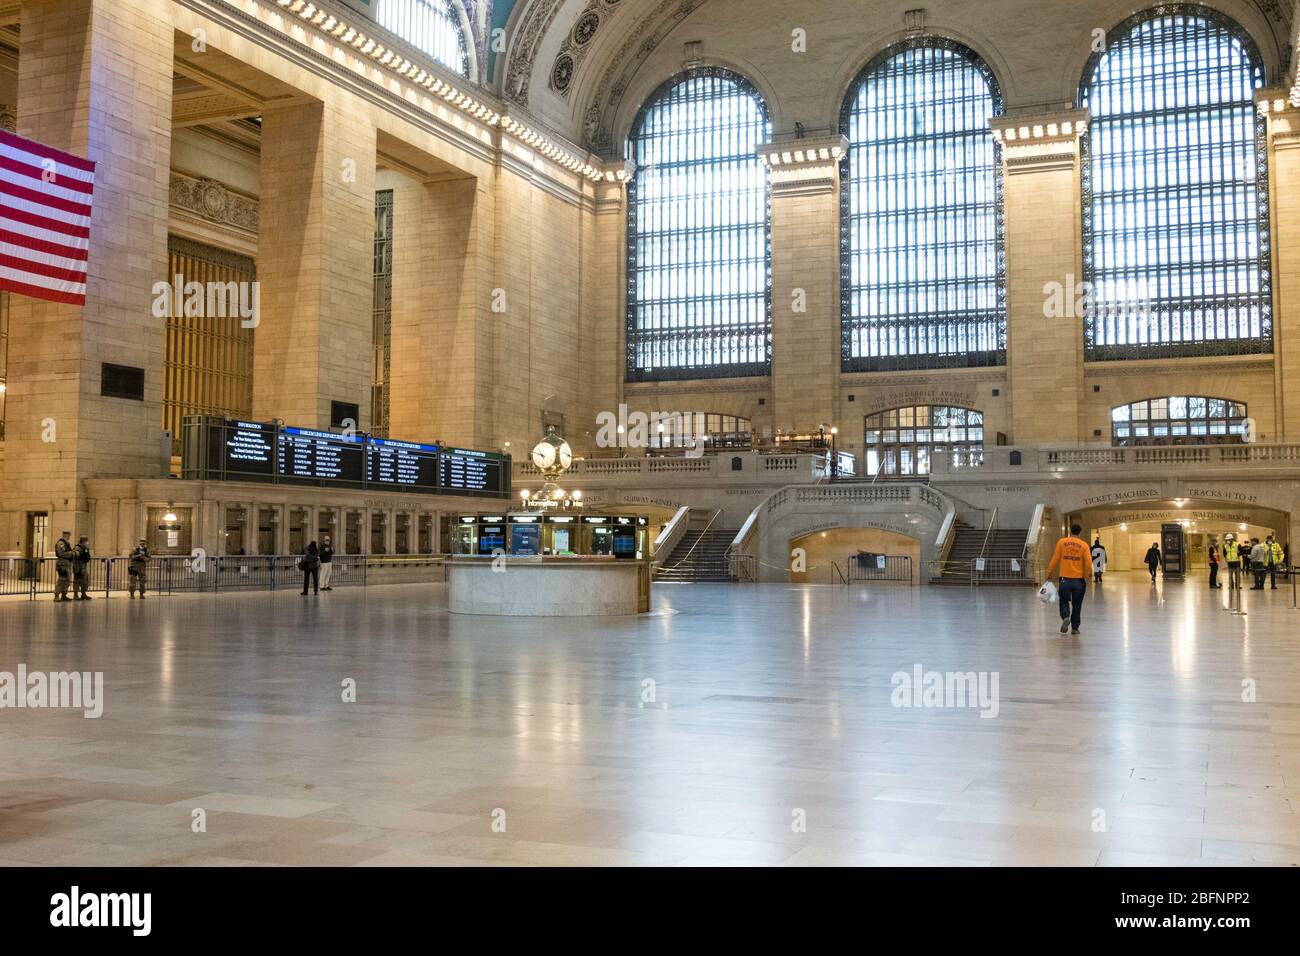 Grand Central is nearly empty due to the COVID-19 pandemic, April 2020, New York City, USA Stock Photo